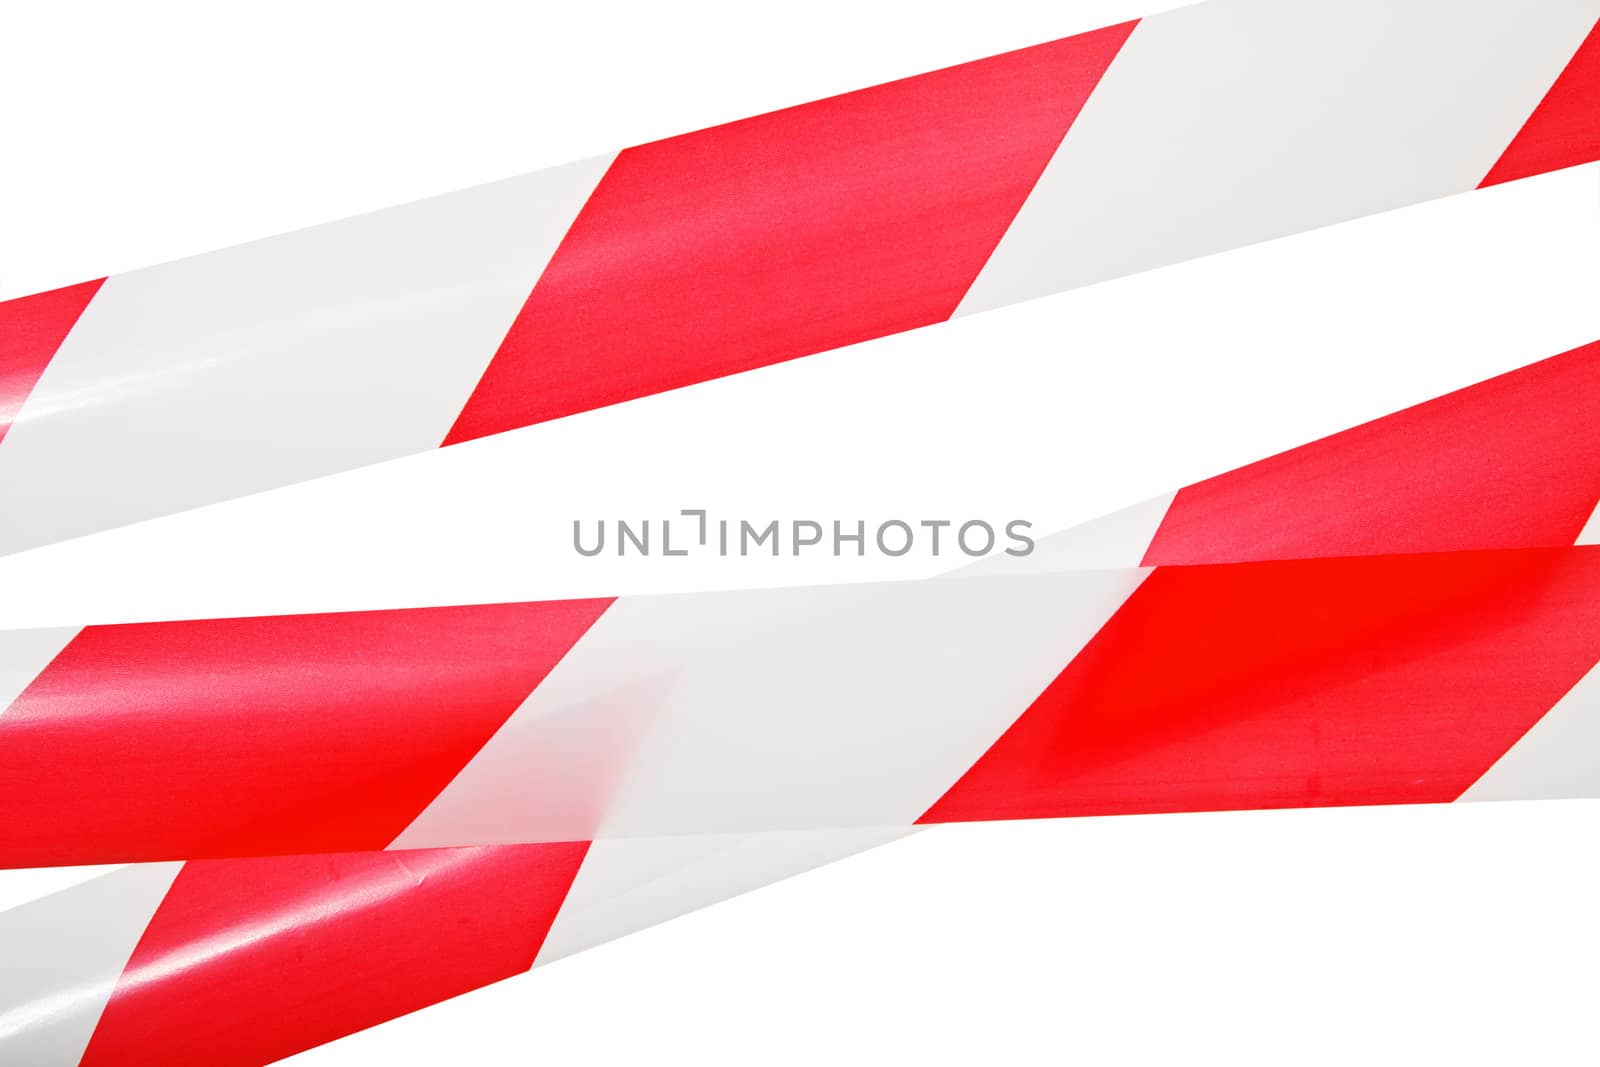 Lines of barrier tape. All on white background.